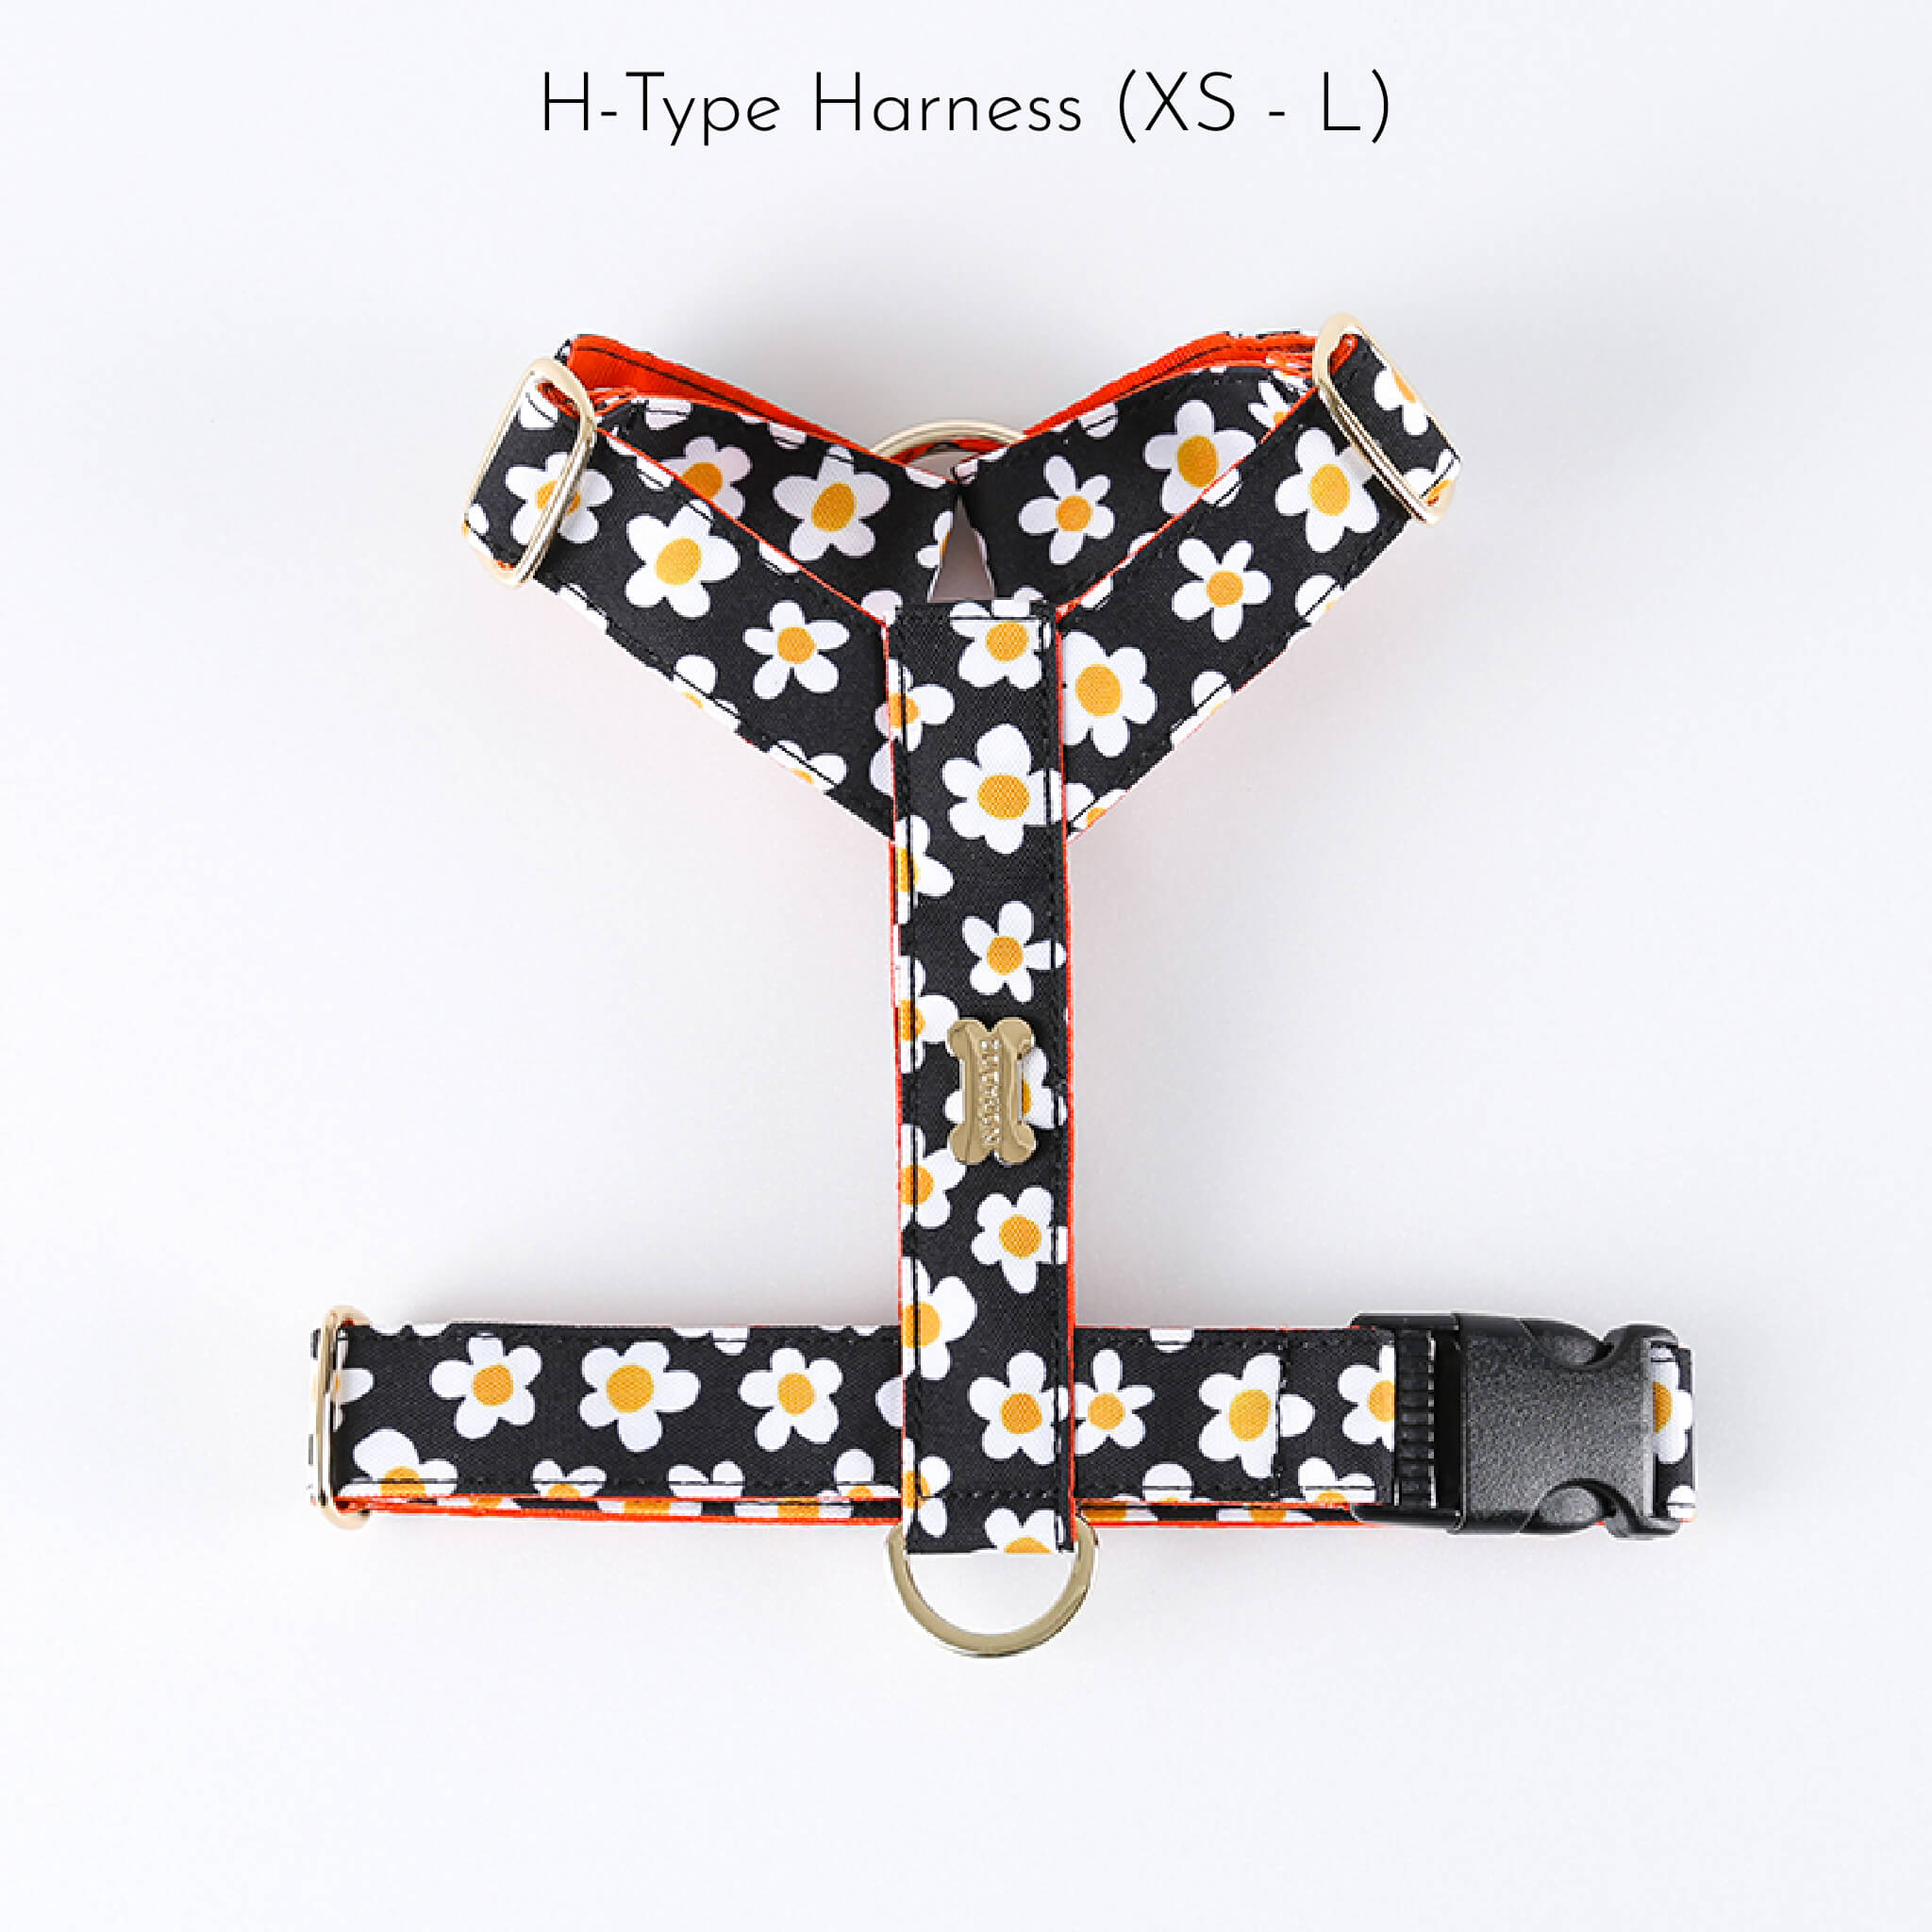 h-type harness